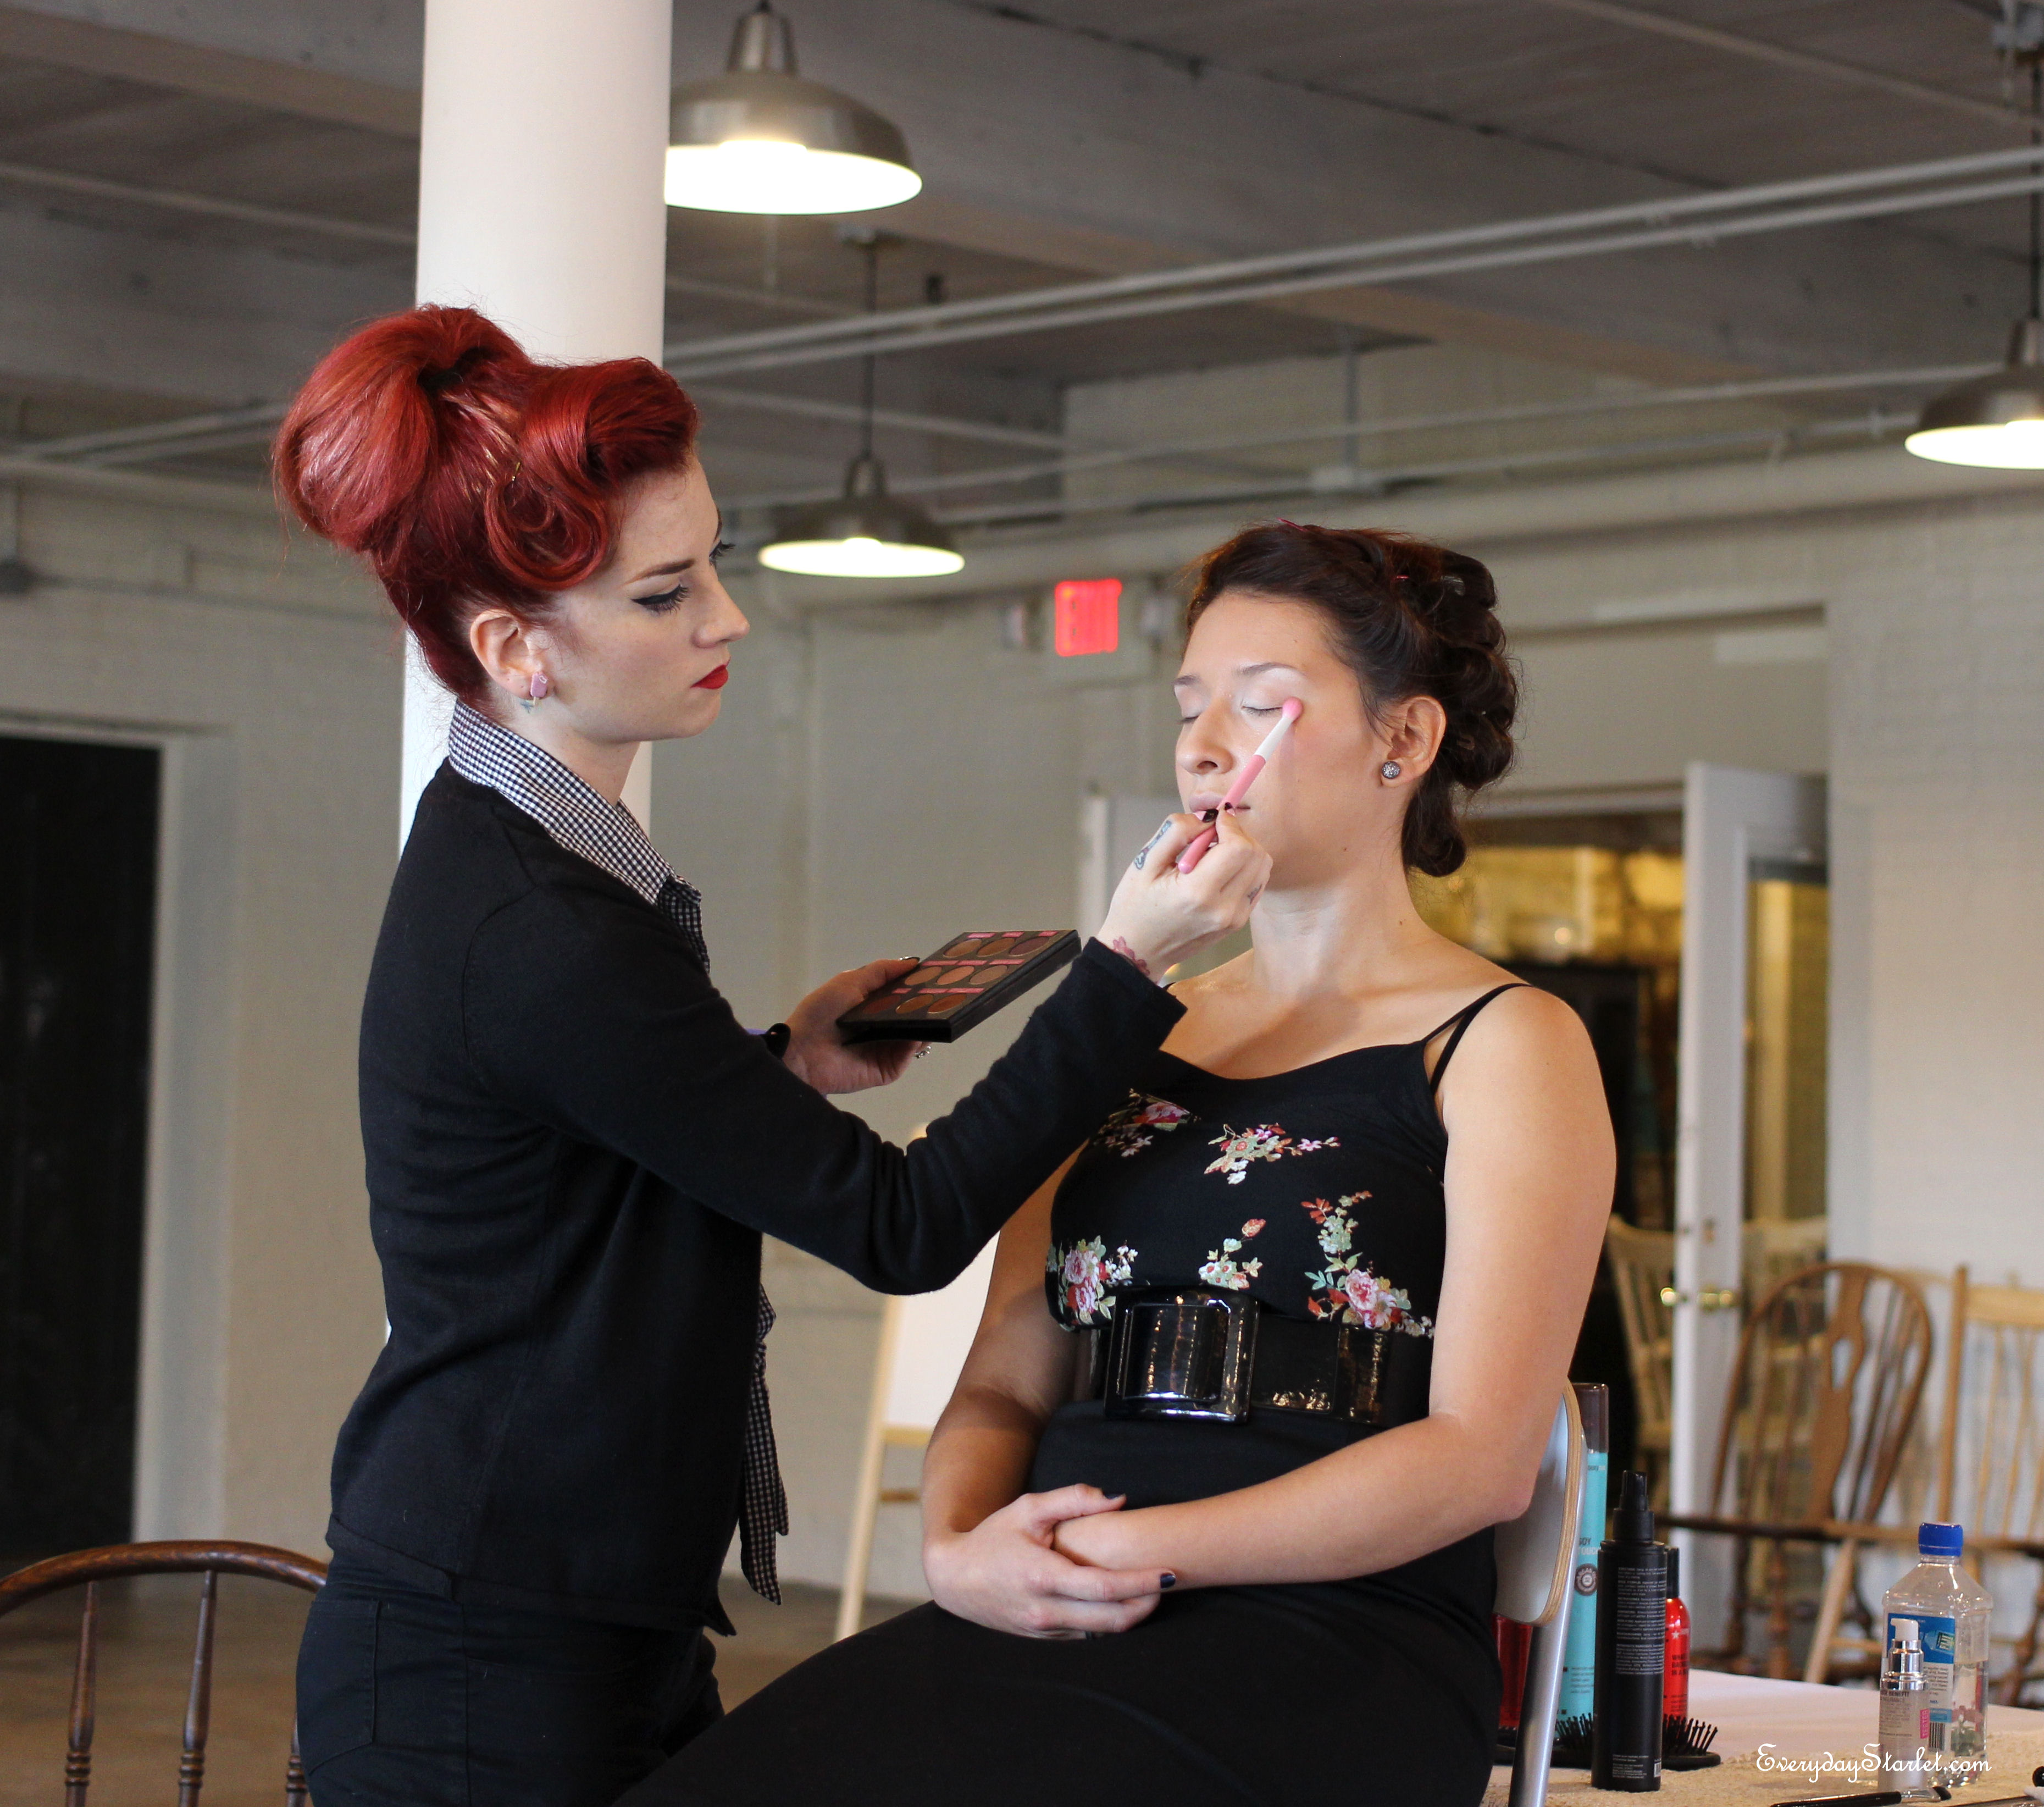 Cherry Dollface Vintage Pinup hair and makeup class with Bomber Betty and Sugar Pill products